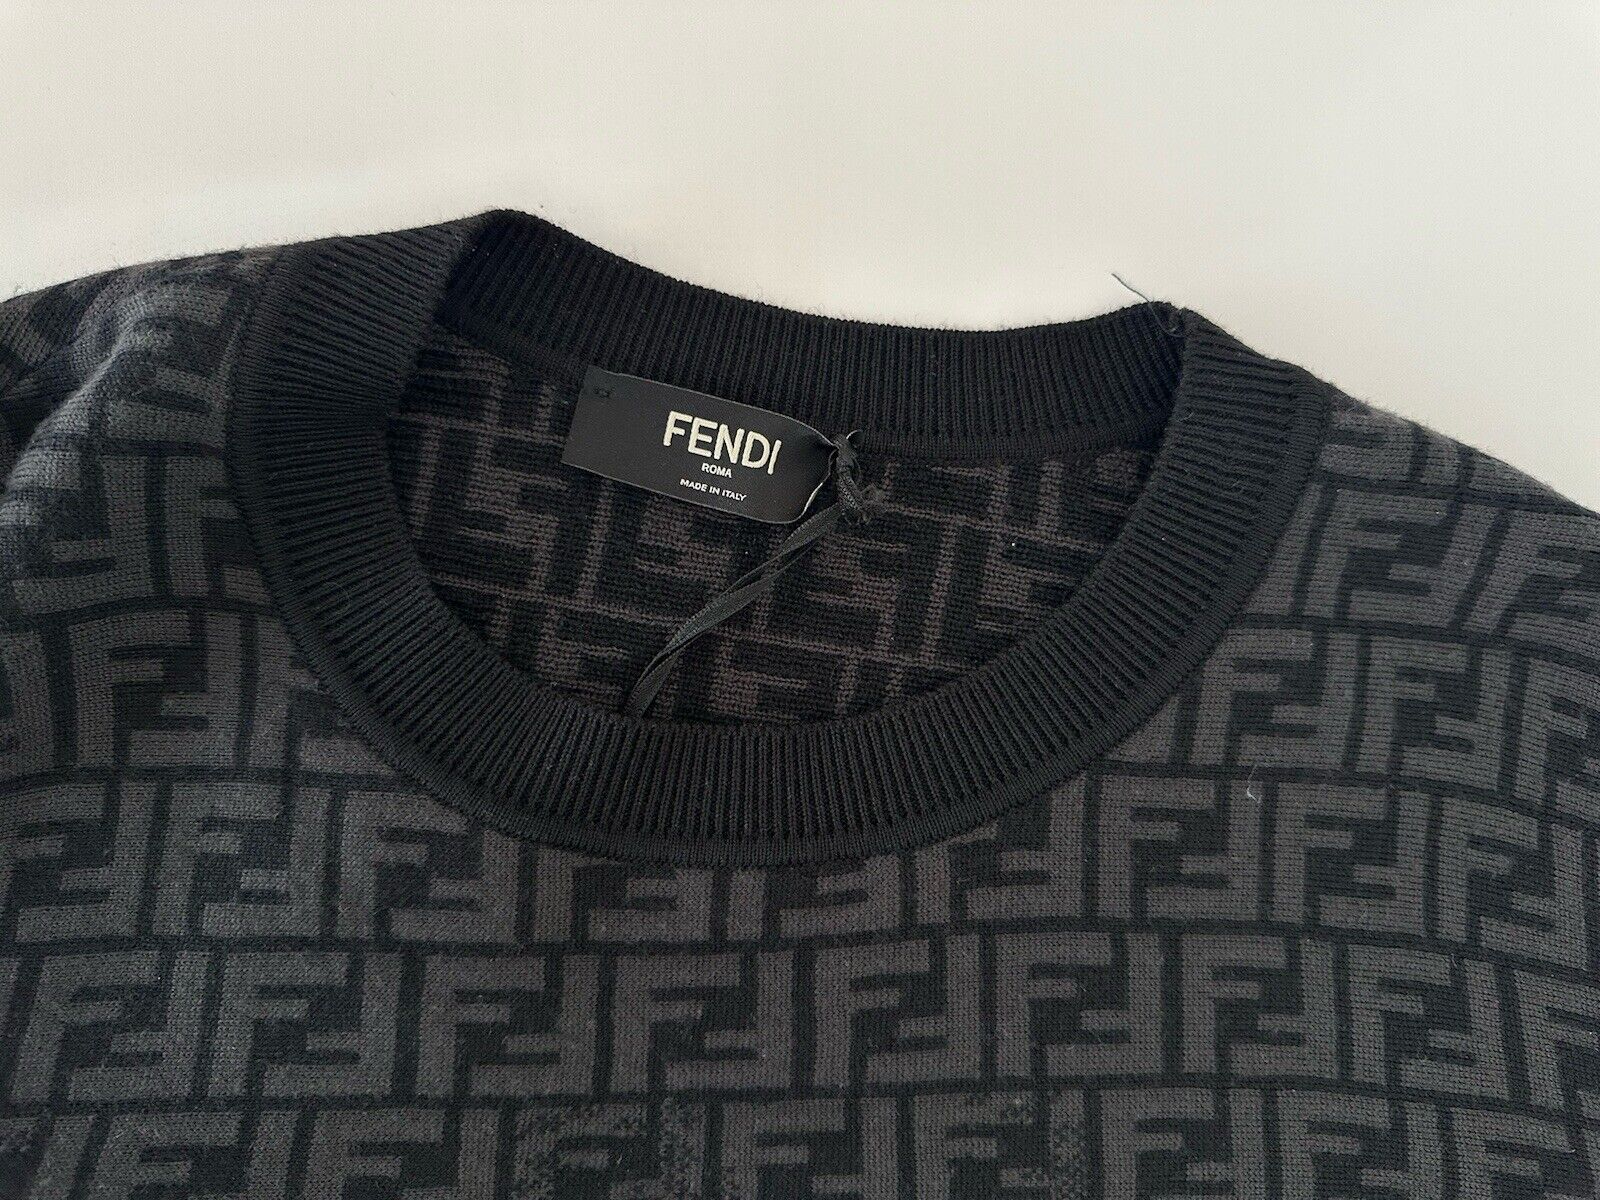 Fendi Knit Wool Sweater 56 Euro (Fits like L-XL) FZX005 Made in Italy NWT $1350